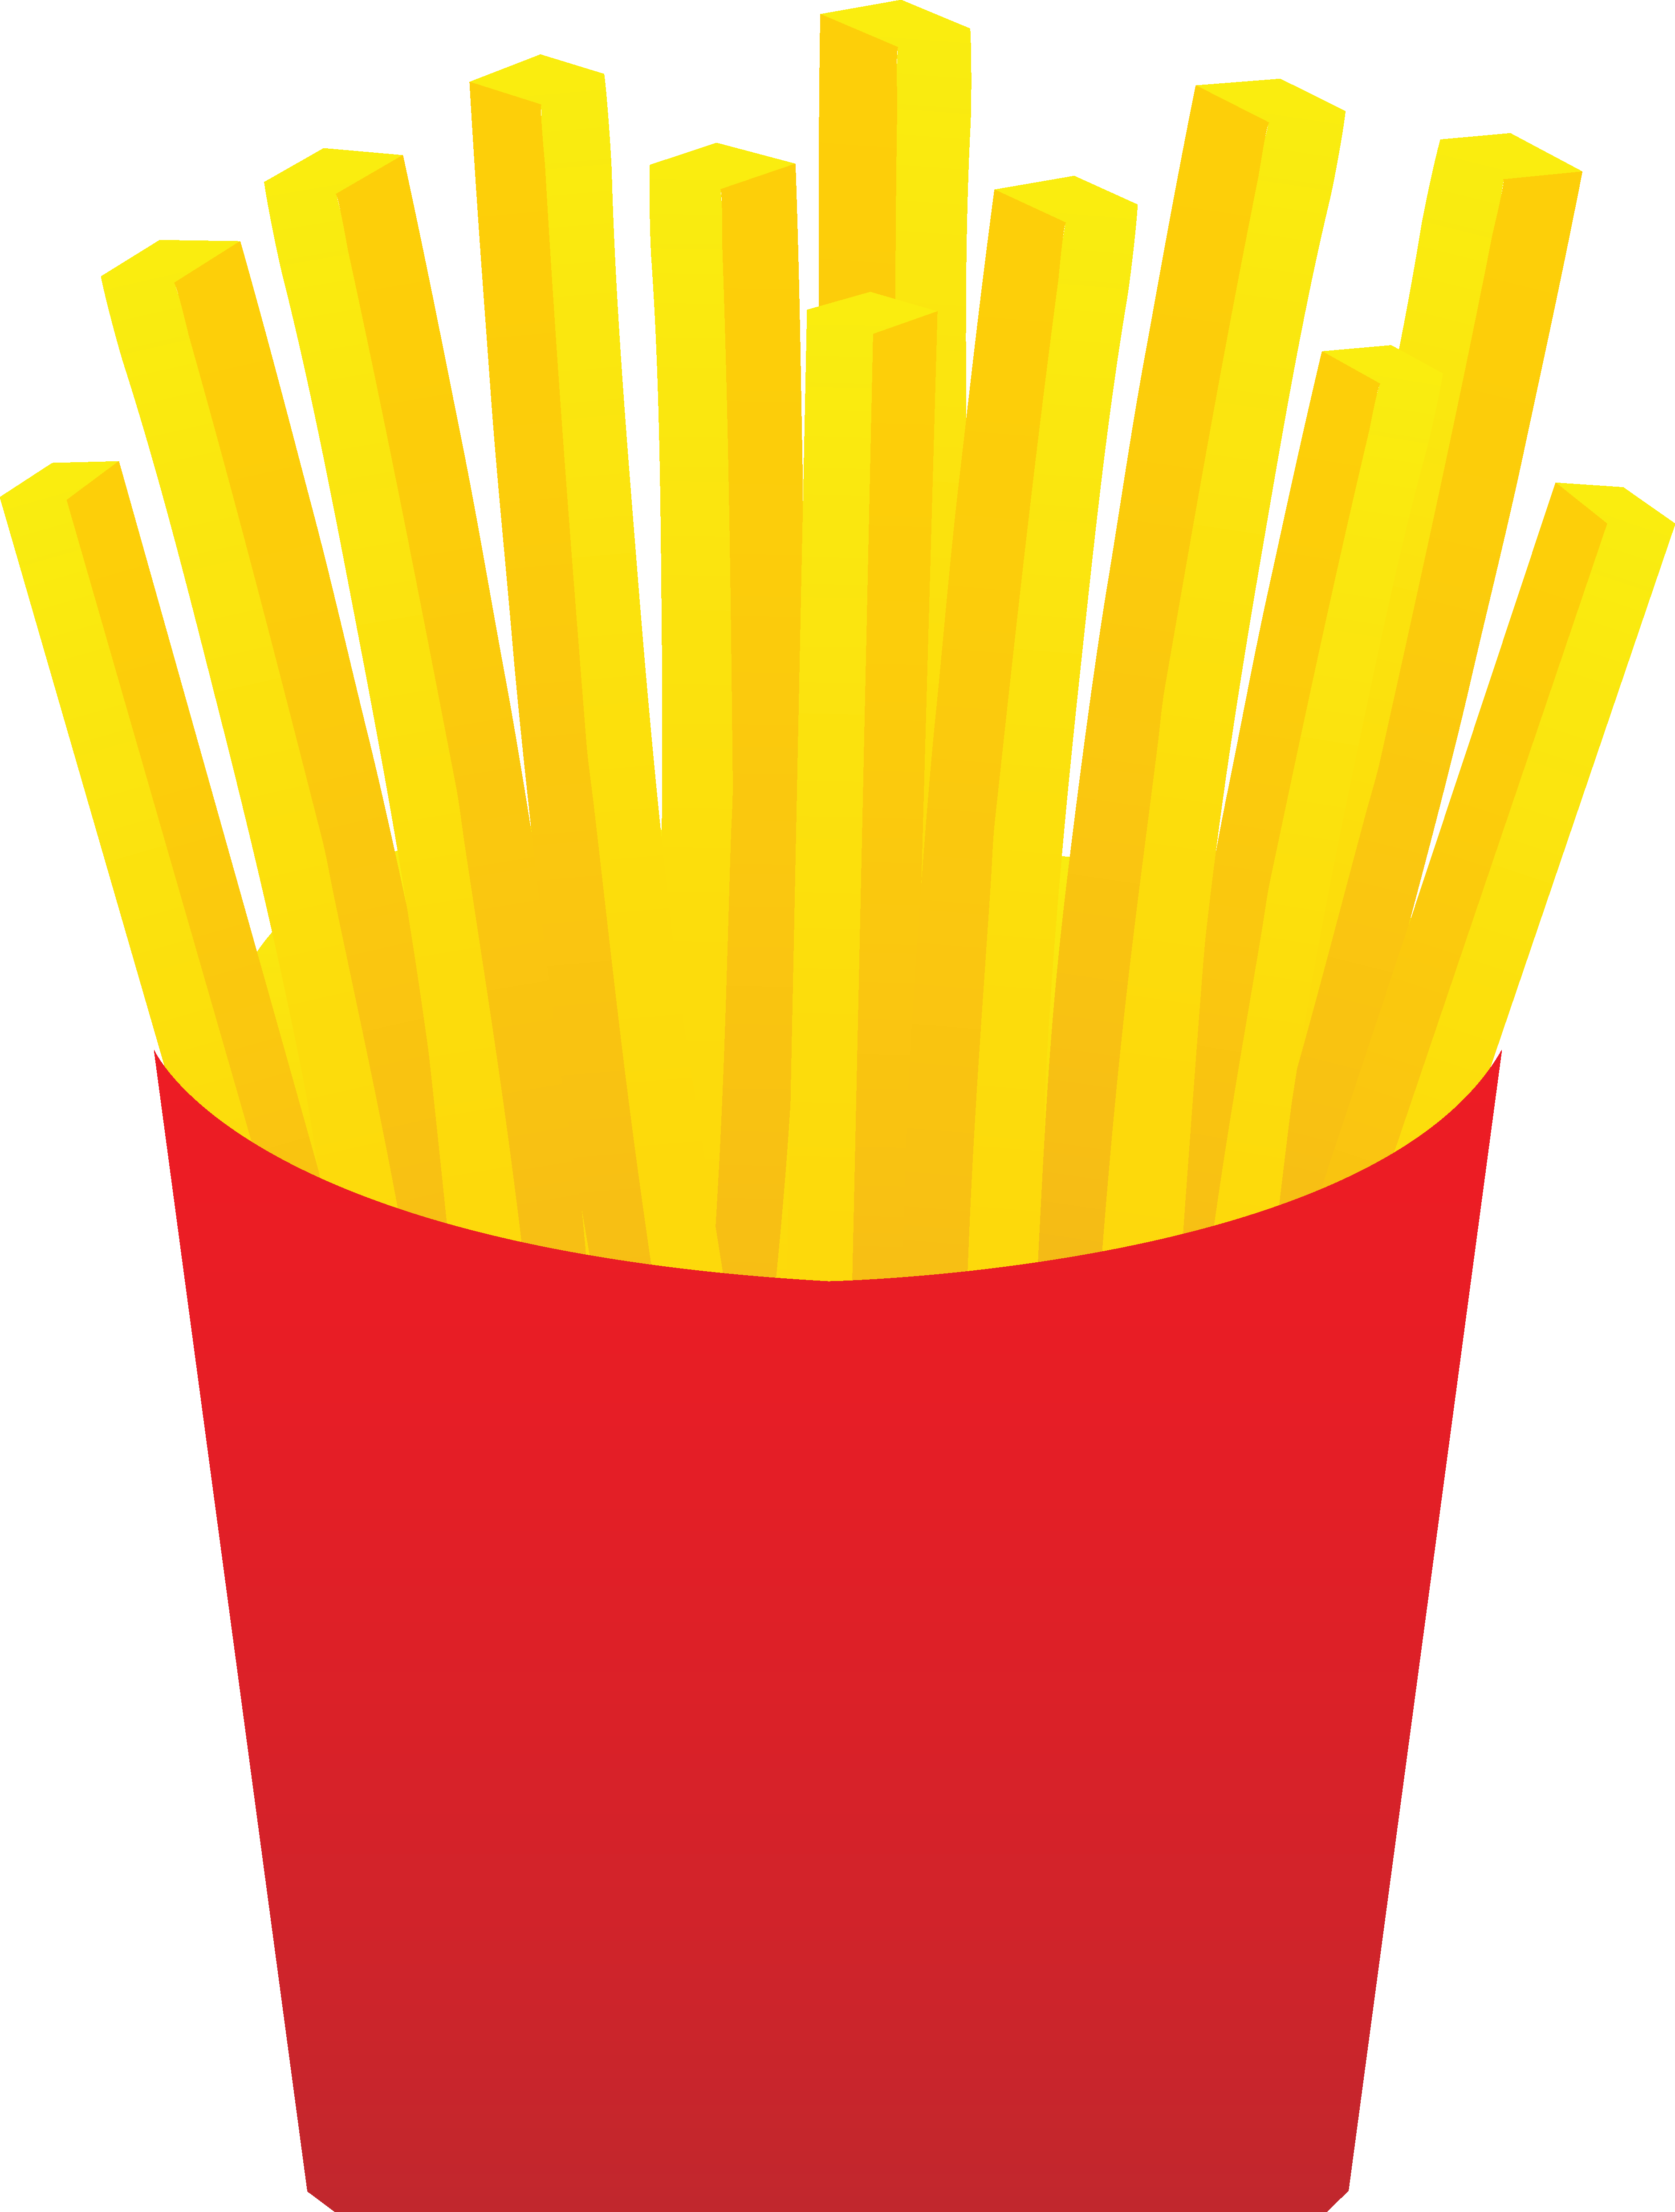 Clipart french fries